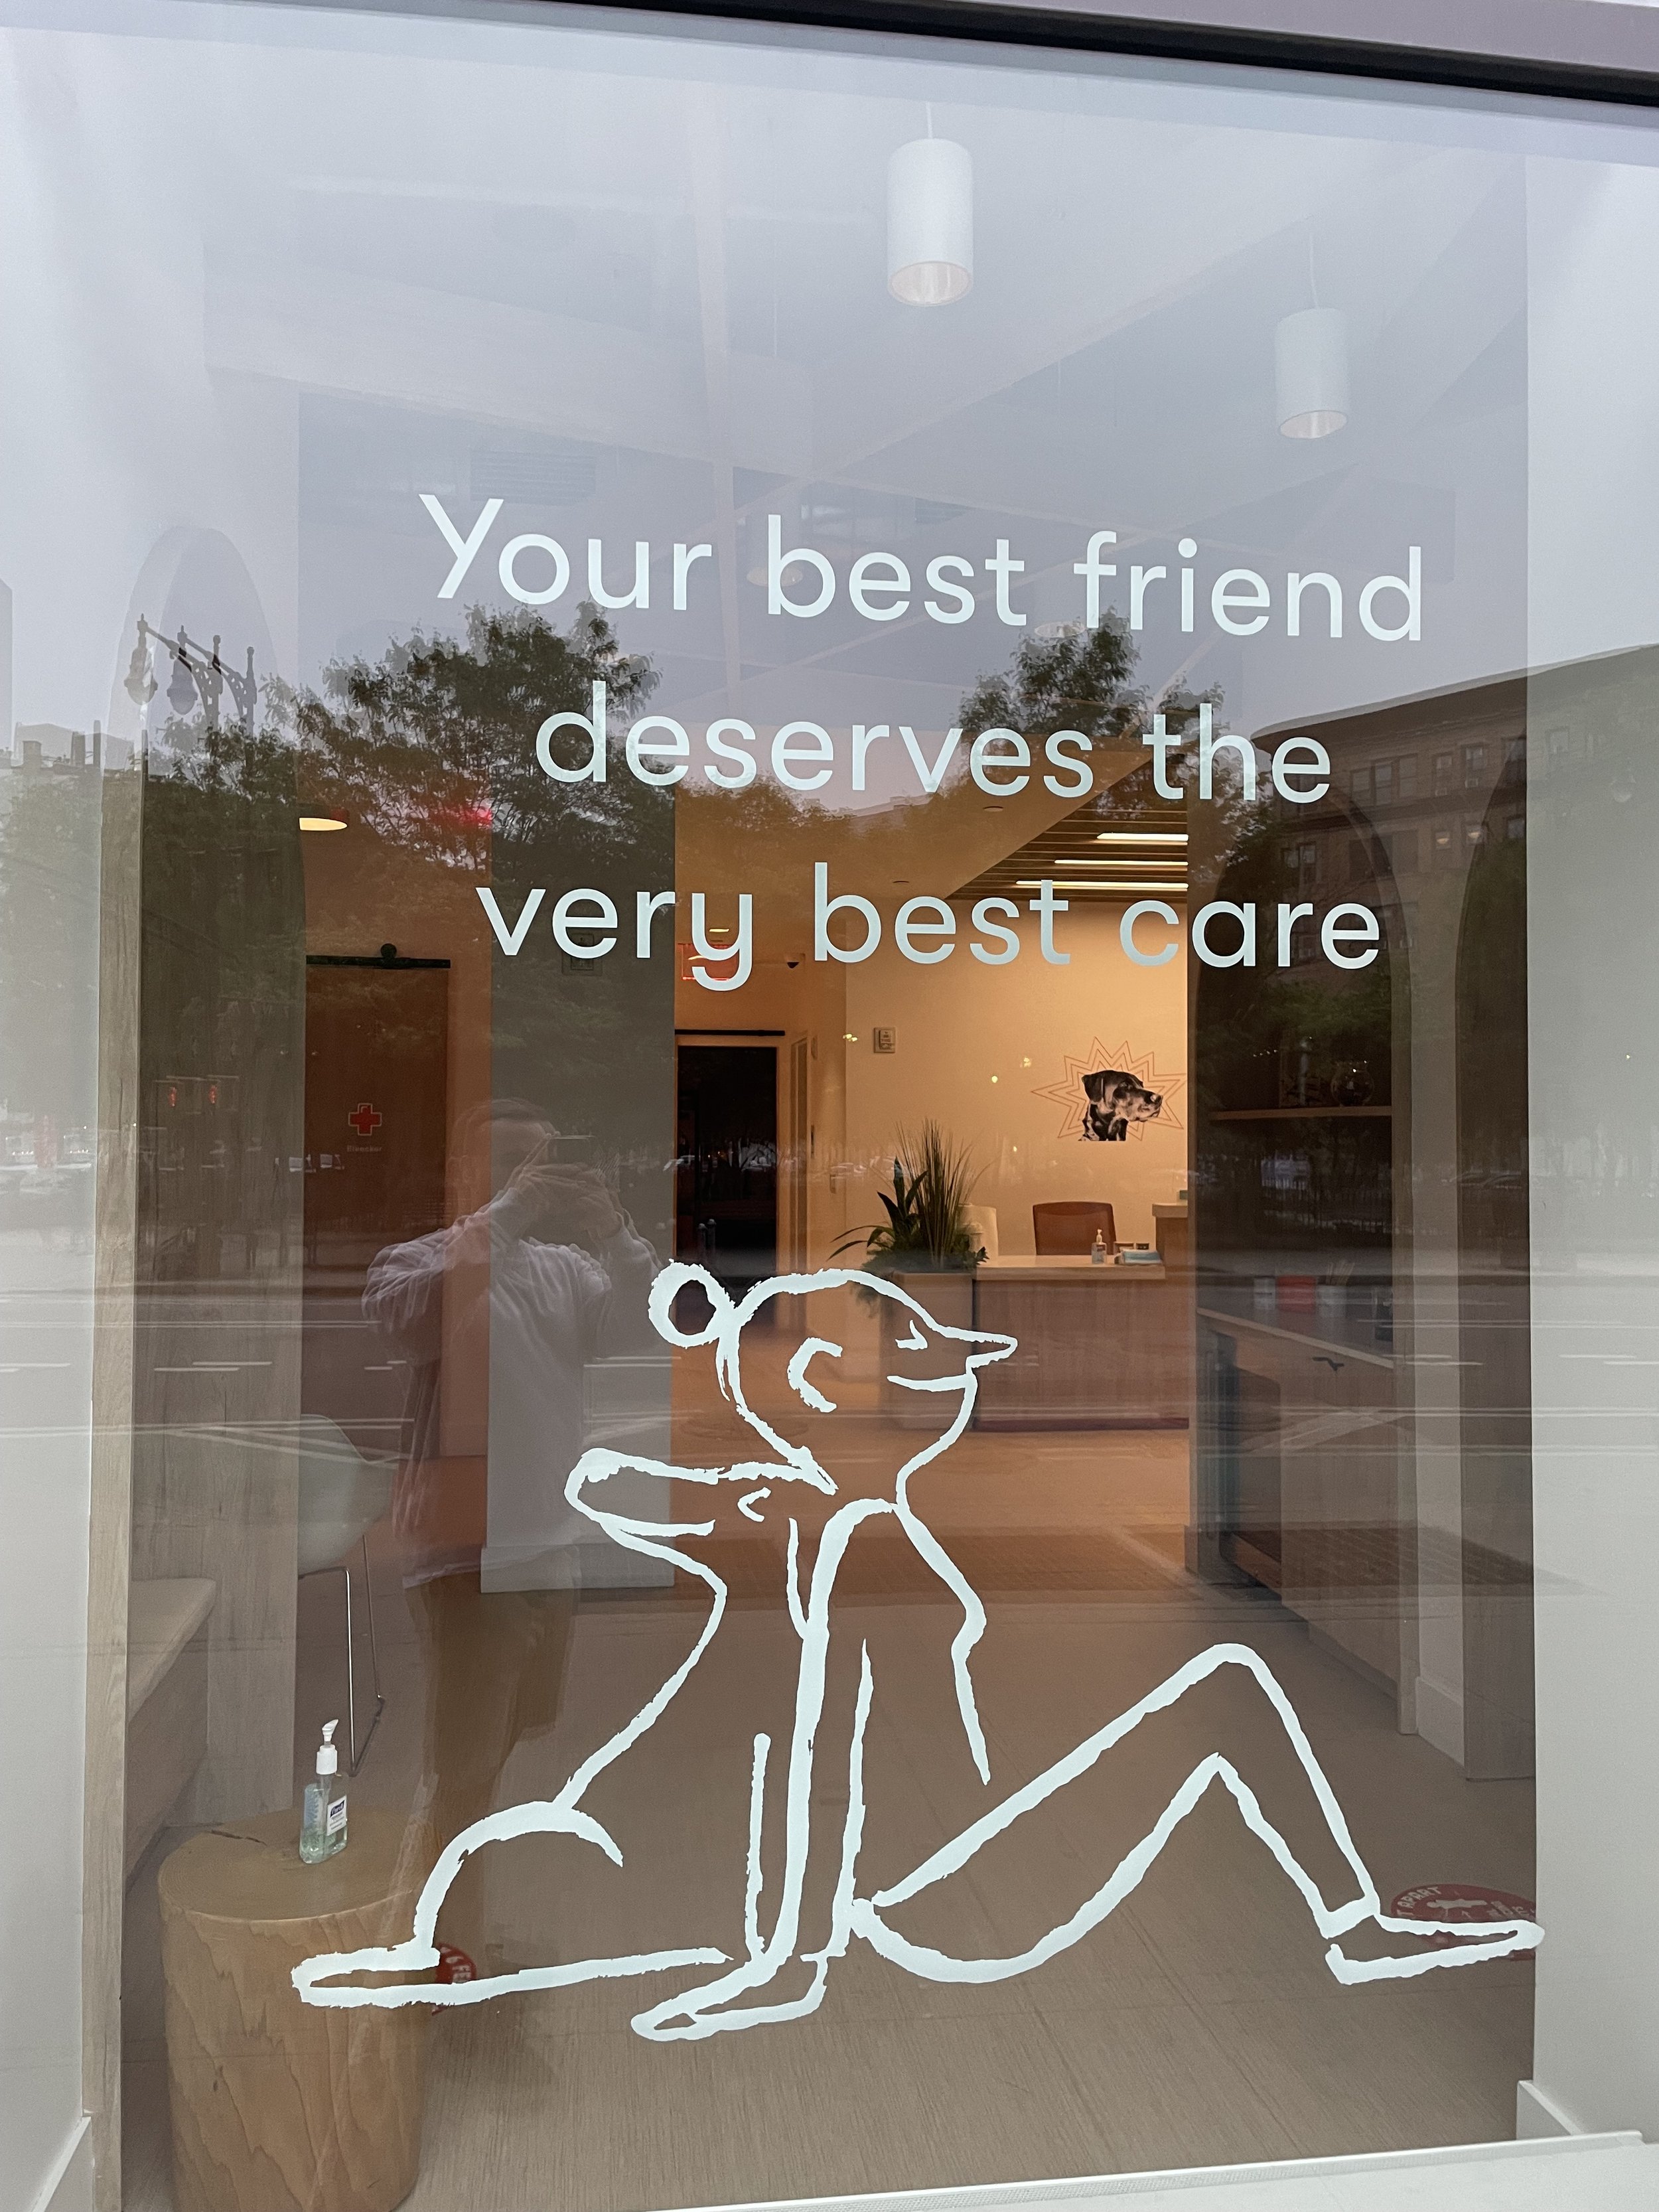 Window sign that says 'Your best friend deserves the very best care'